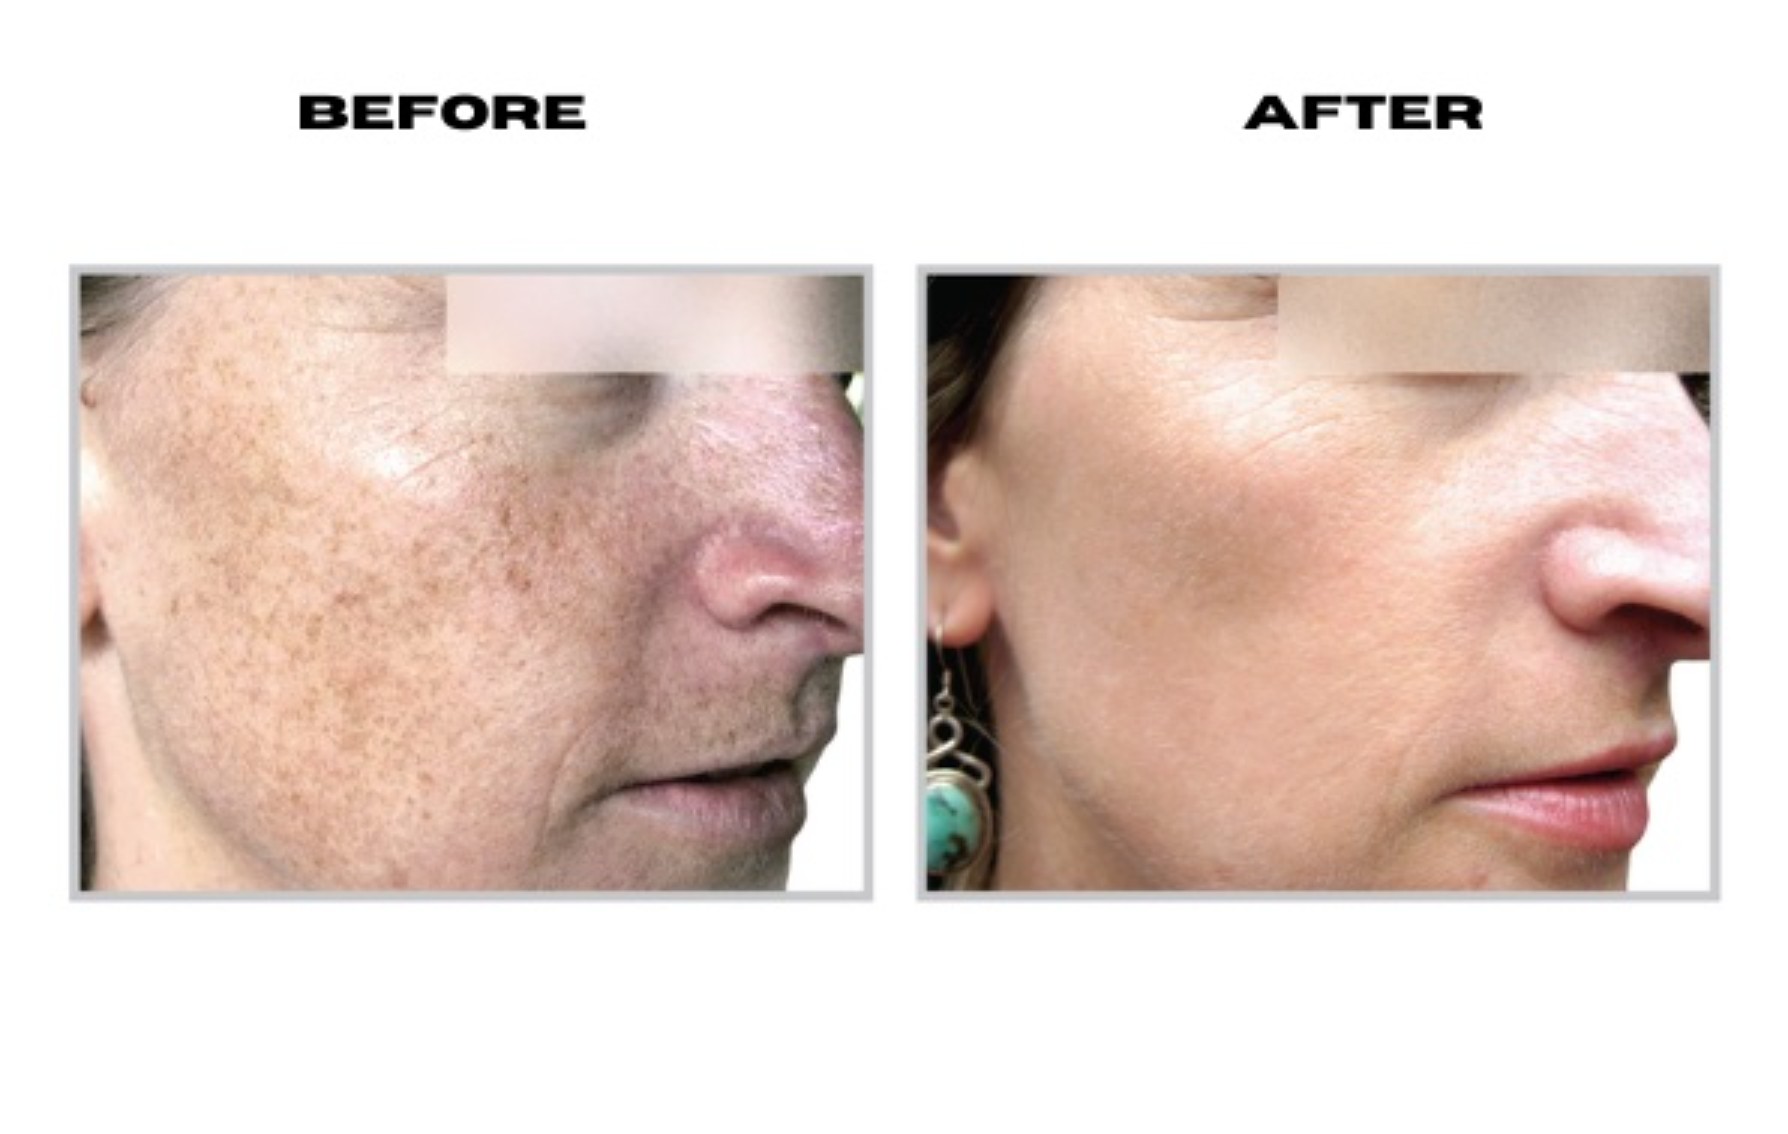 HALO hybrid fractional laser before and after pictures